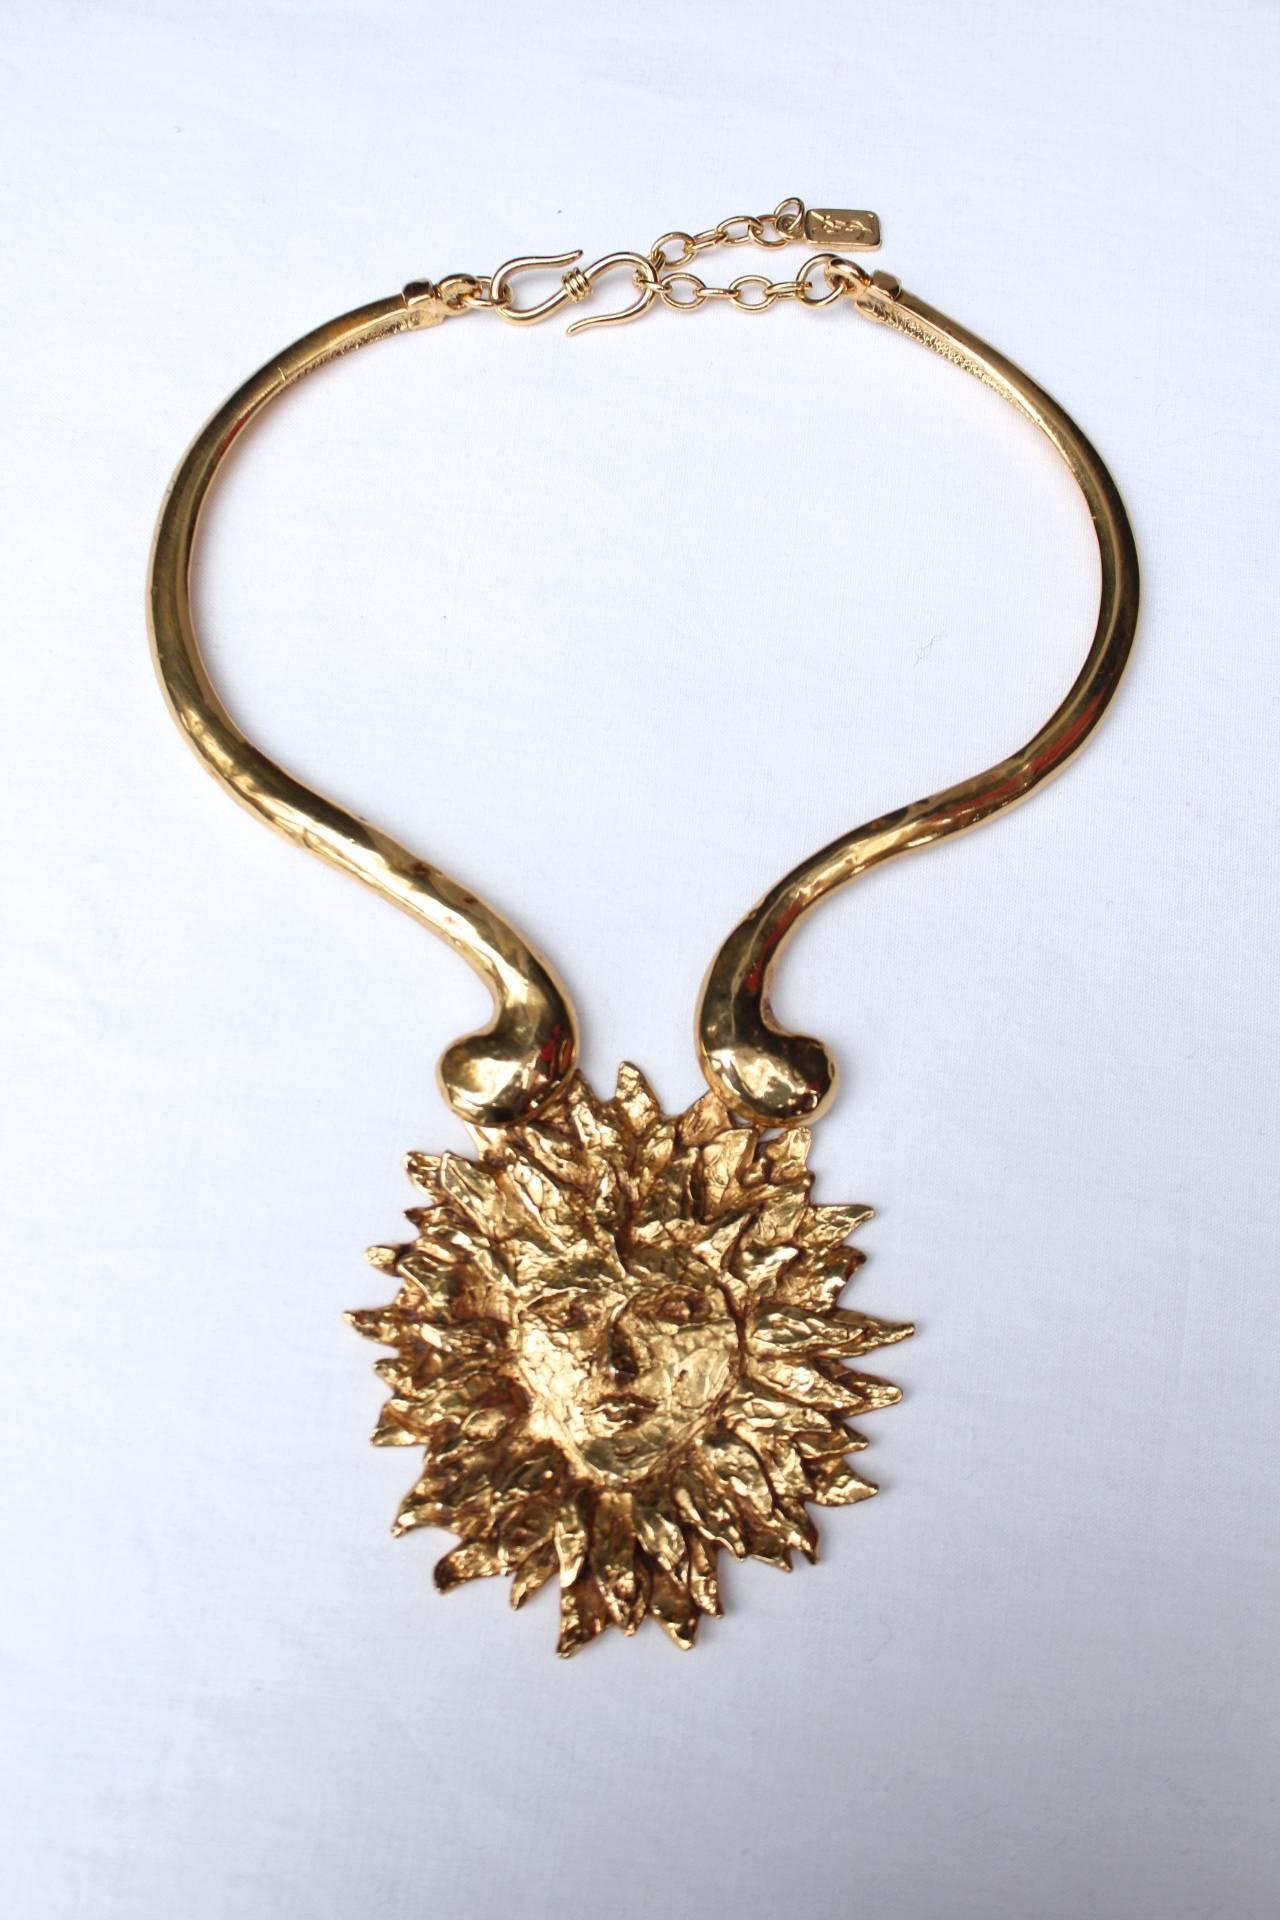 YVES SAINT LAURENT (Made in France) Rare torque necklace with the sun face in hammered gilt metal designed by Robert Goossens in the 1980s for Yves Saint Laurent.

A same model is included in the collection of Barbara Berger which was exhibited in